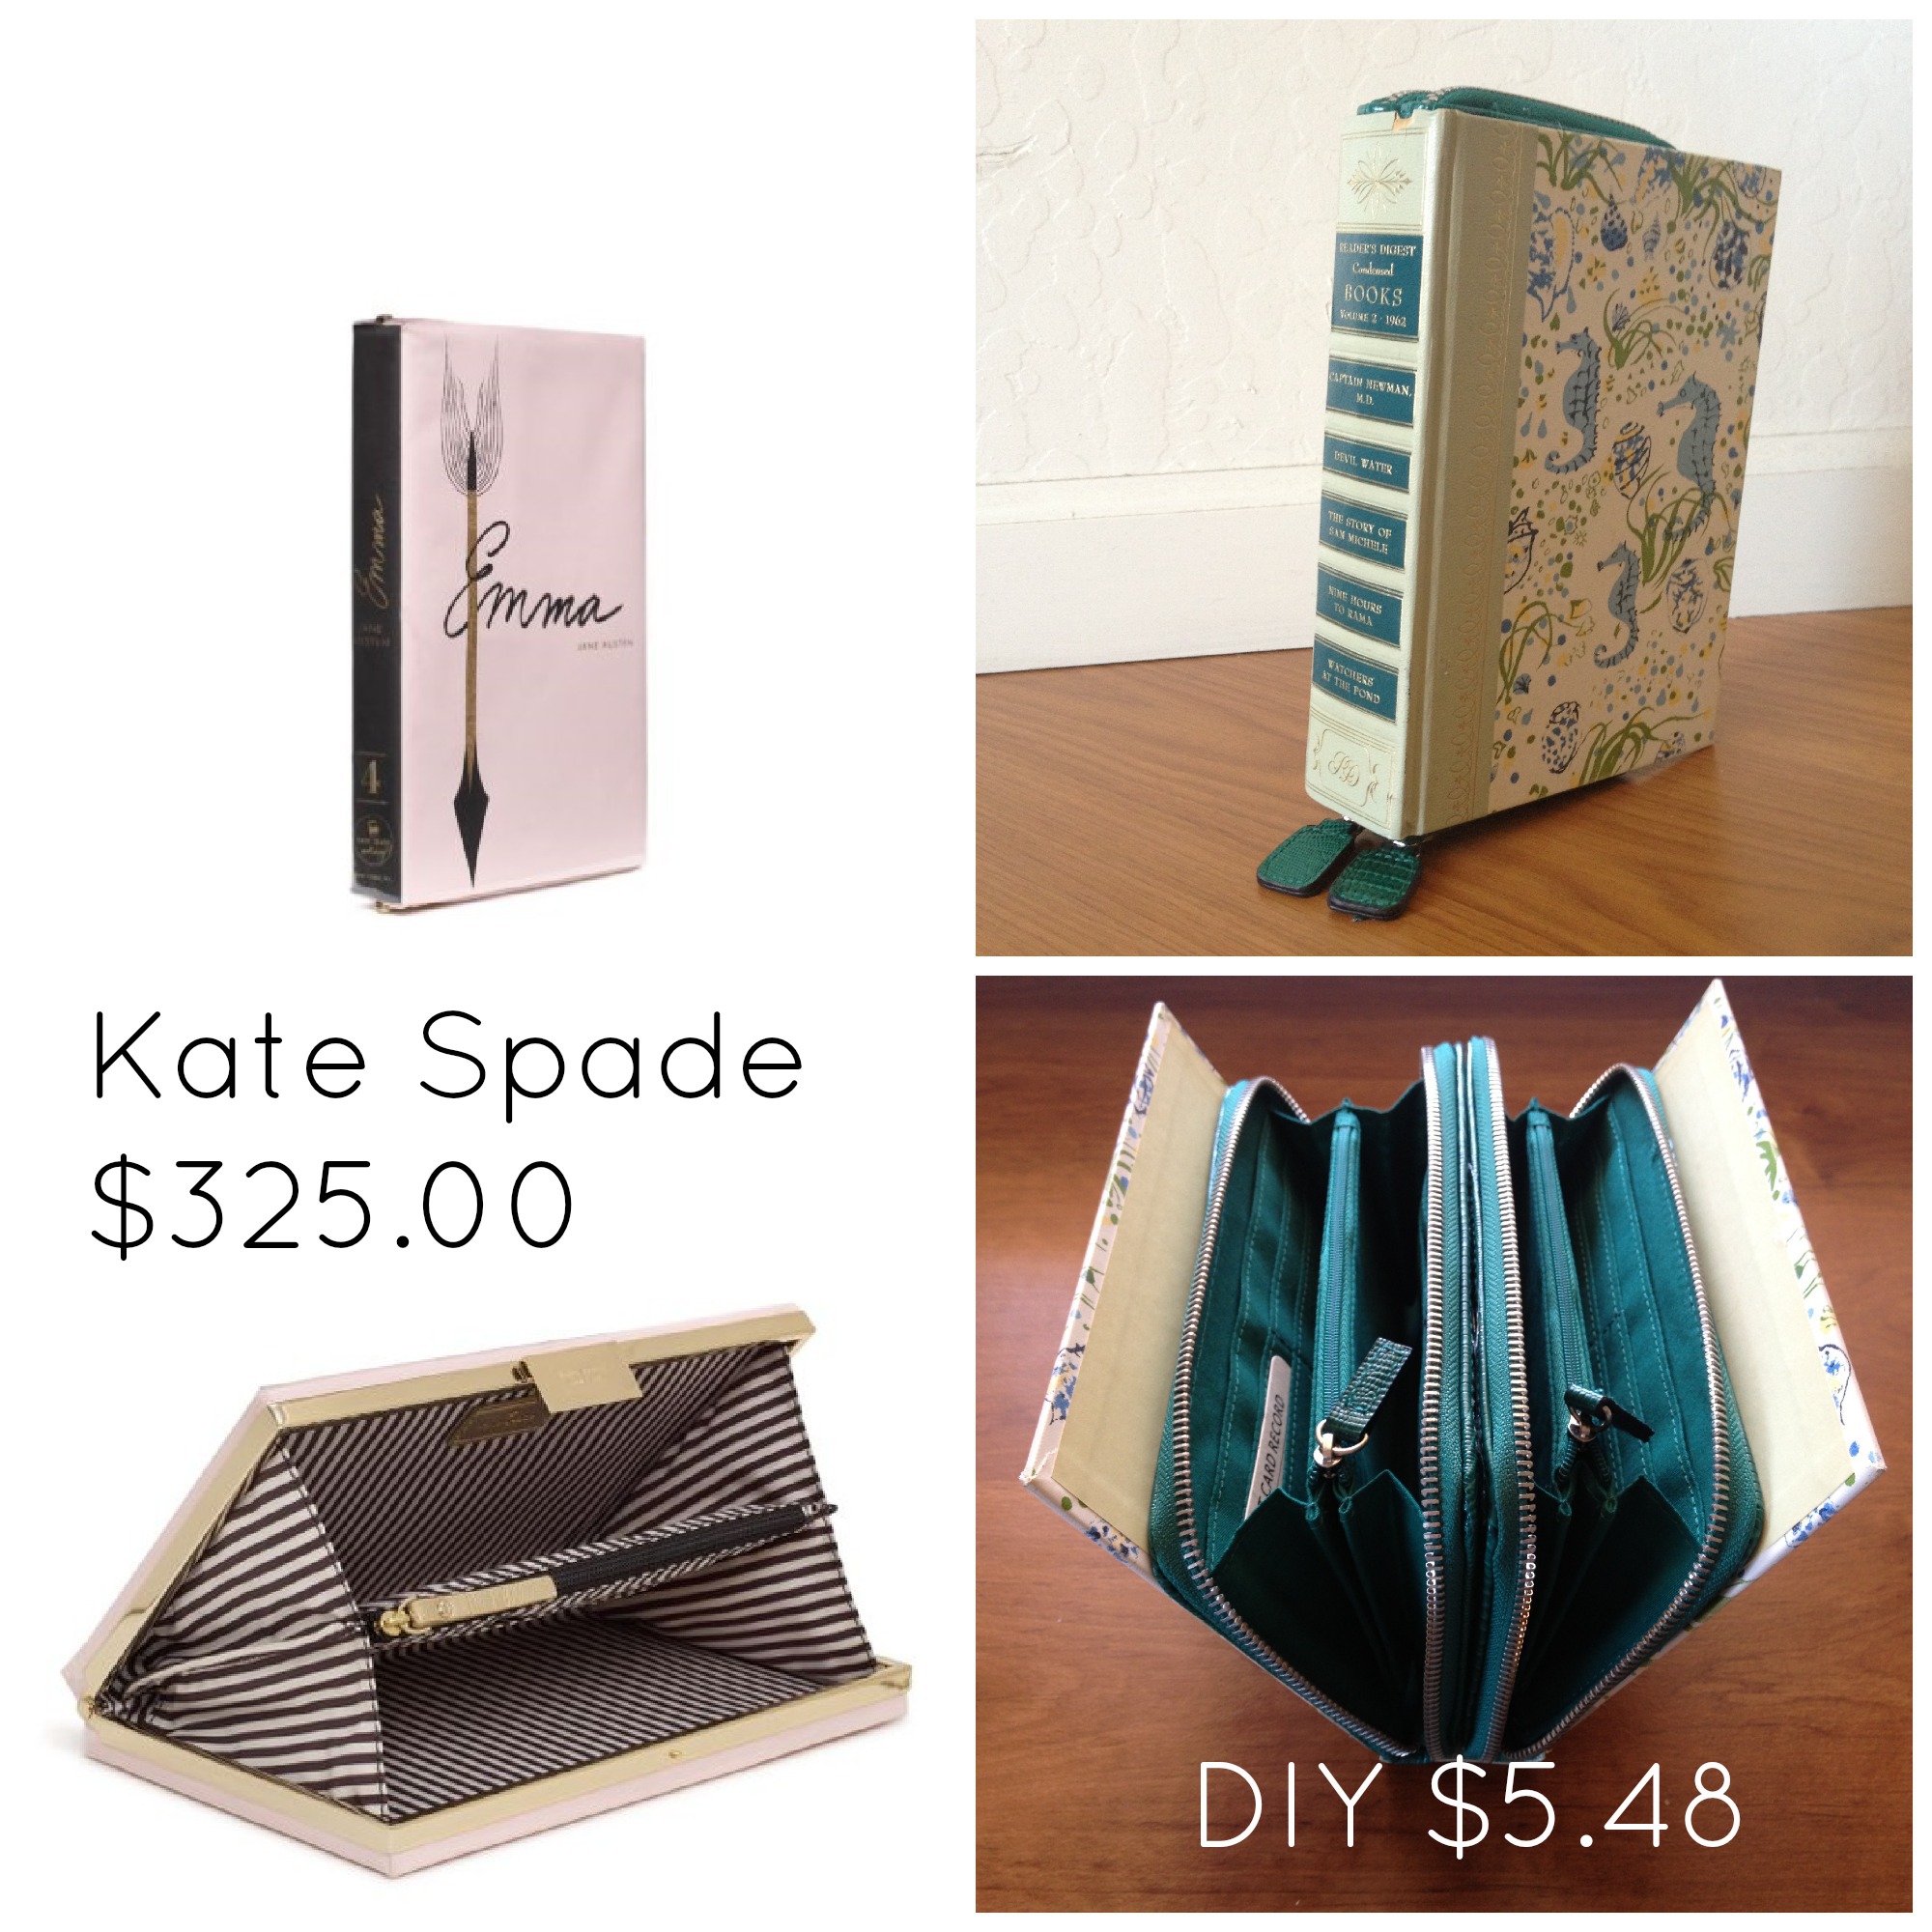 DIY Kate Spade Book Clutch for $5 - The Minimal-ish Mama